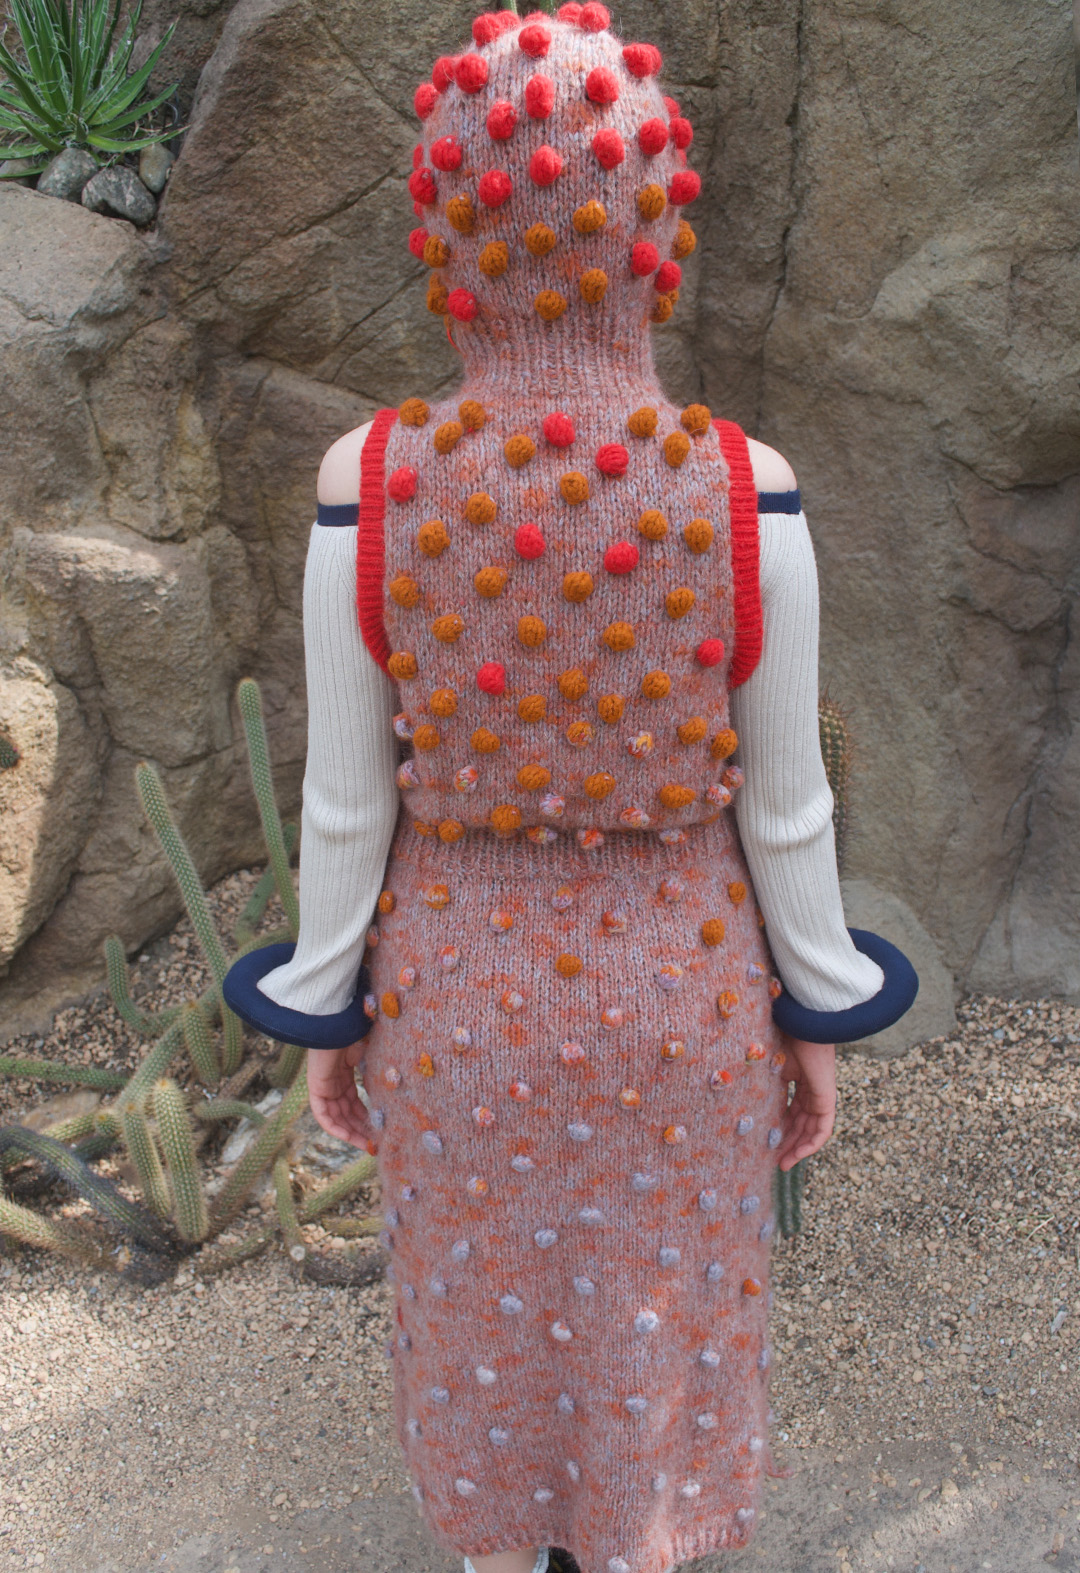 Back view of a woman in a hooded bobble knit dress.